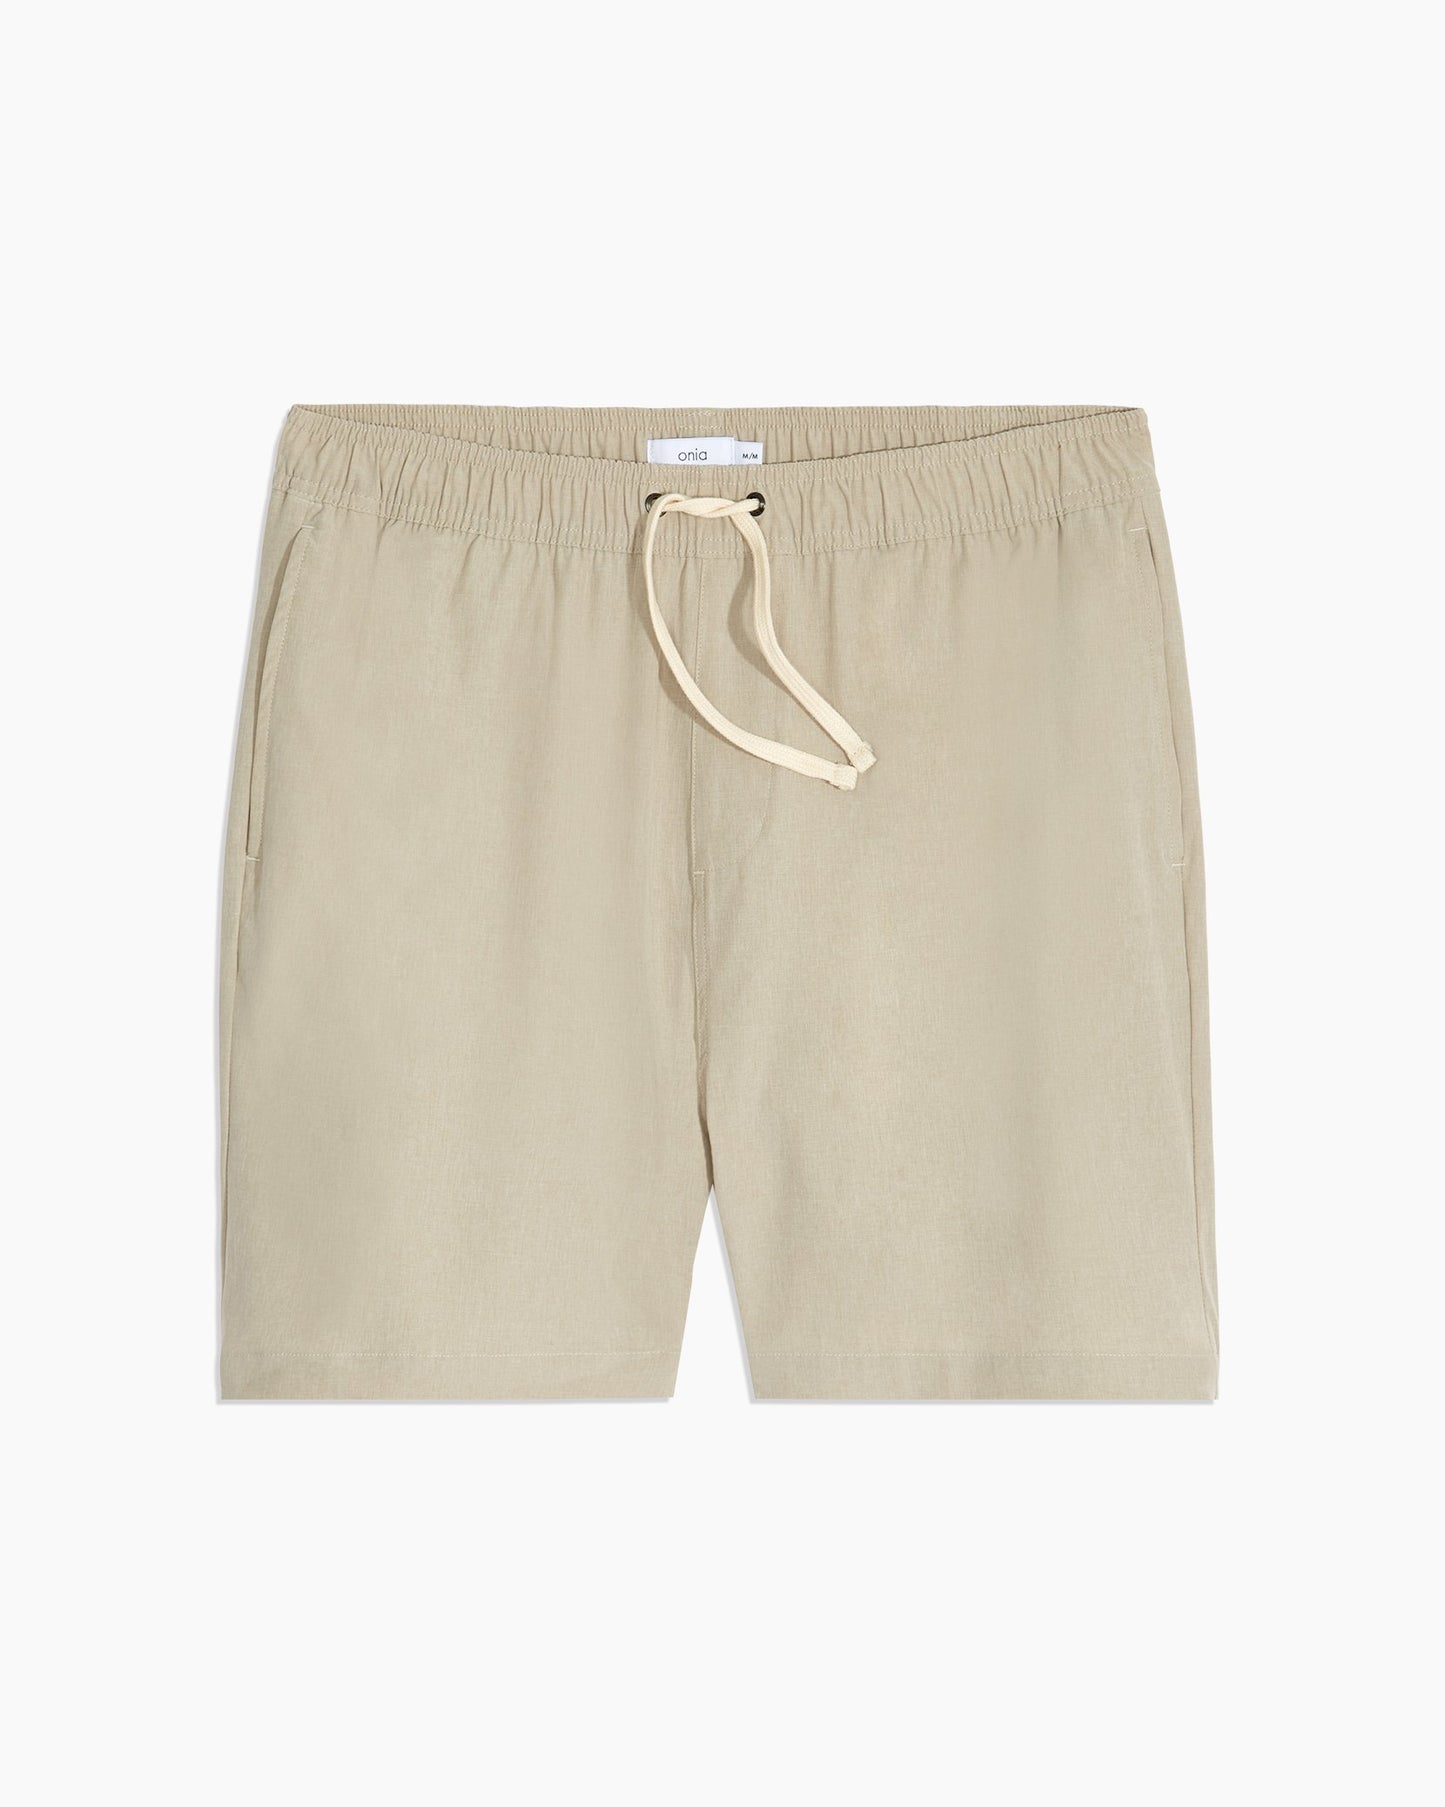 LAND TO WATER STRETCH CHAMBRAY SHORT